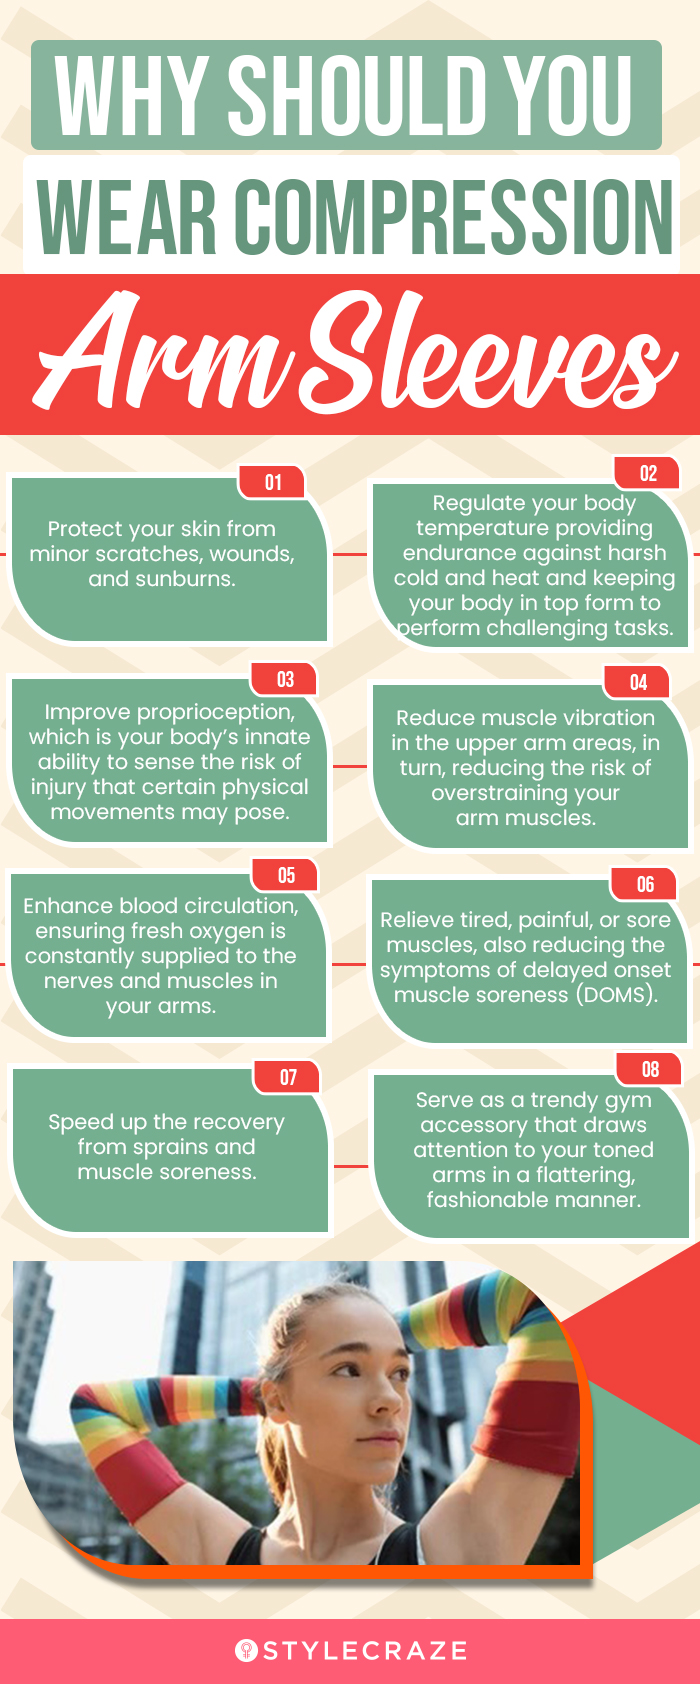 Why Should You Wear Compression Arm Sleeves (infographic)